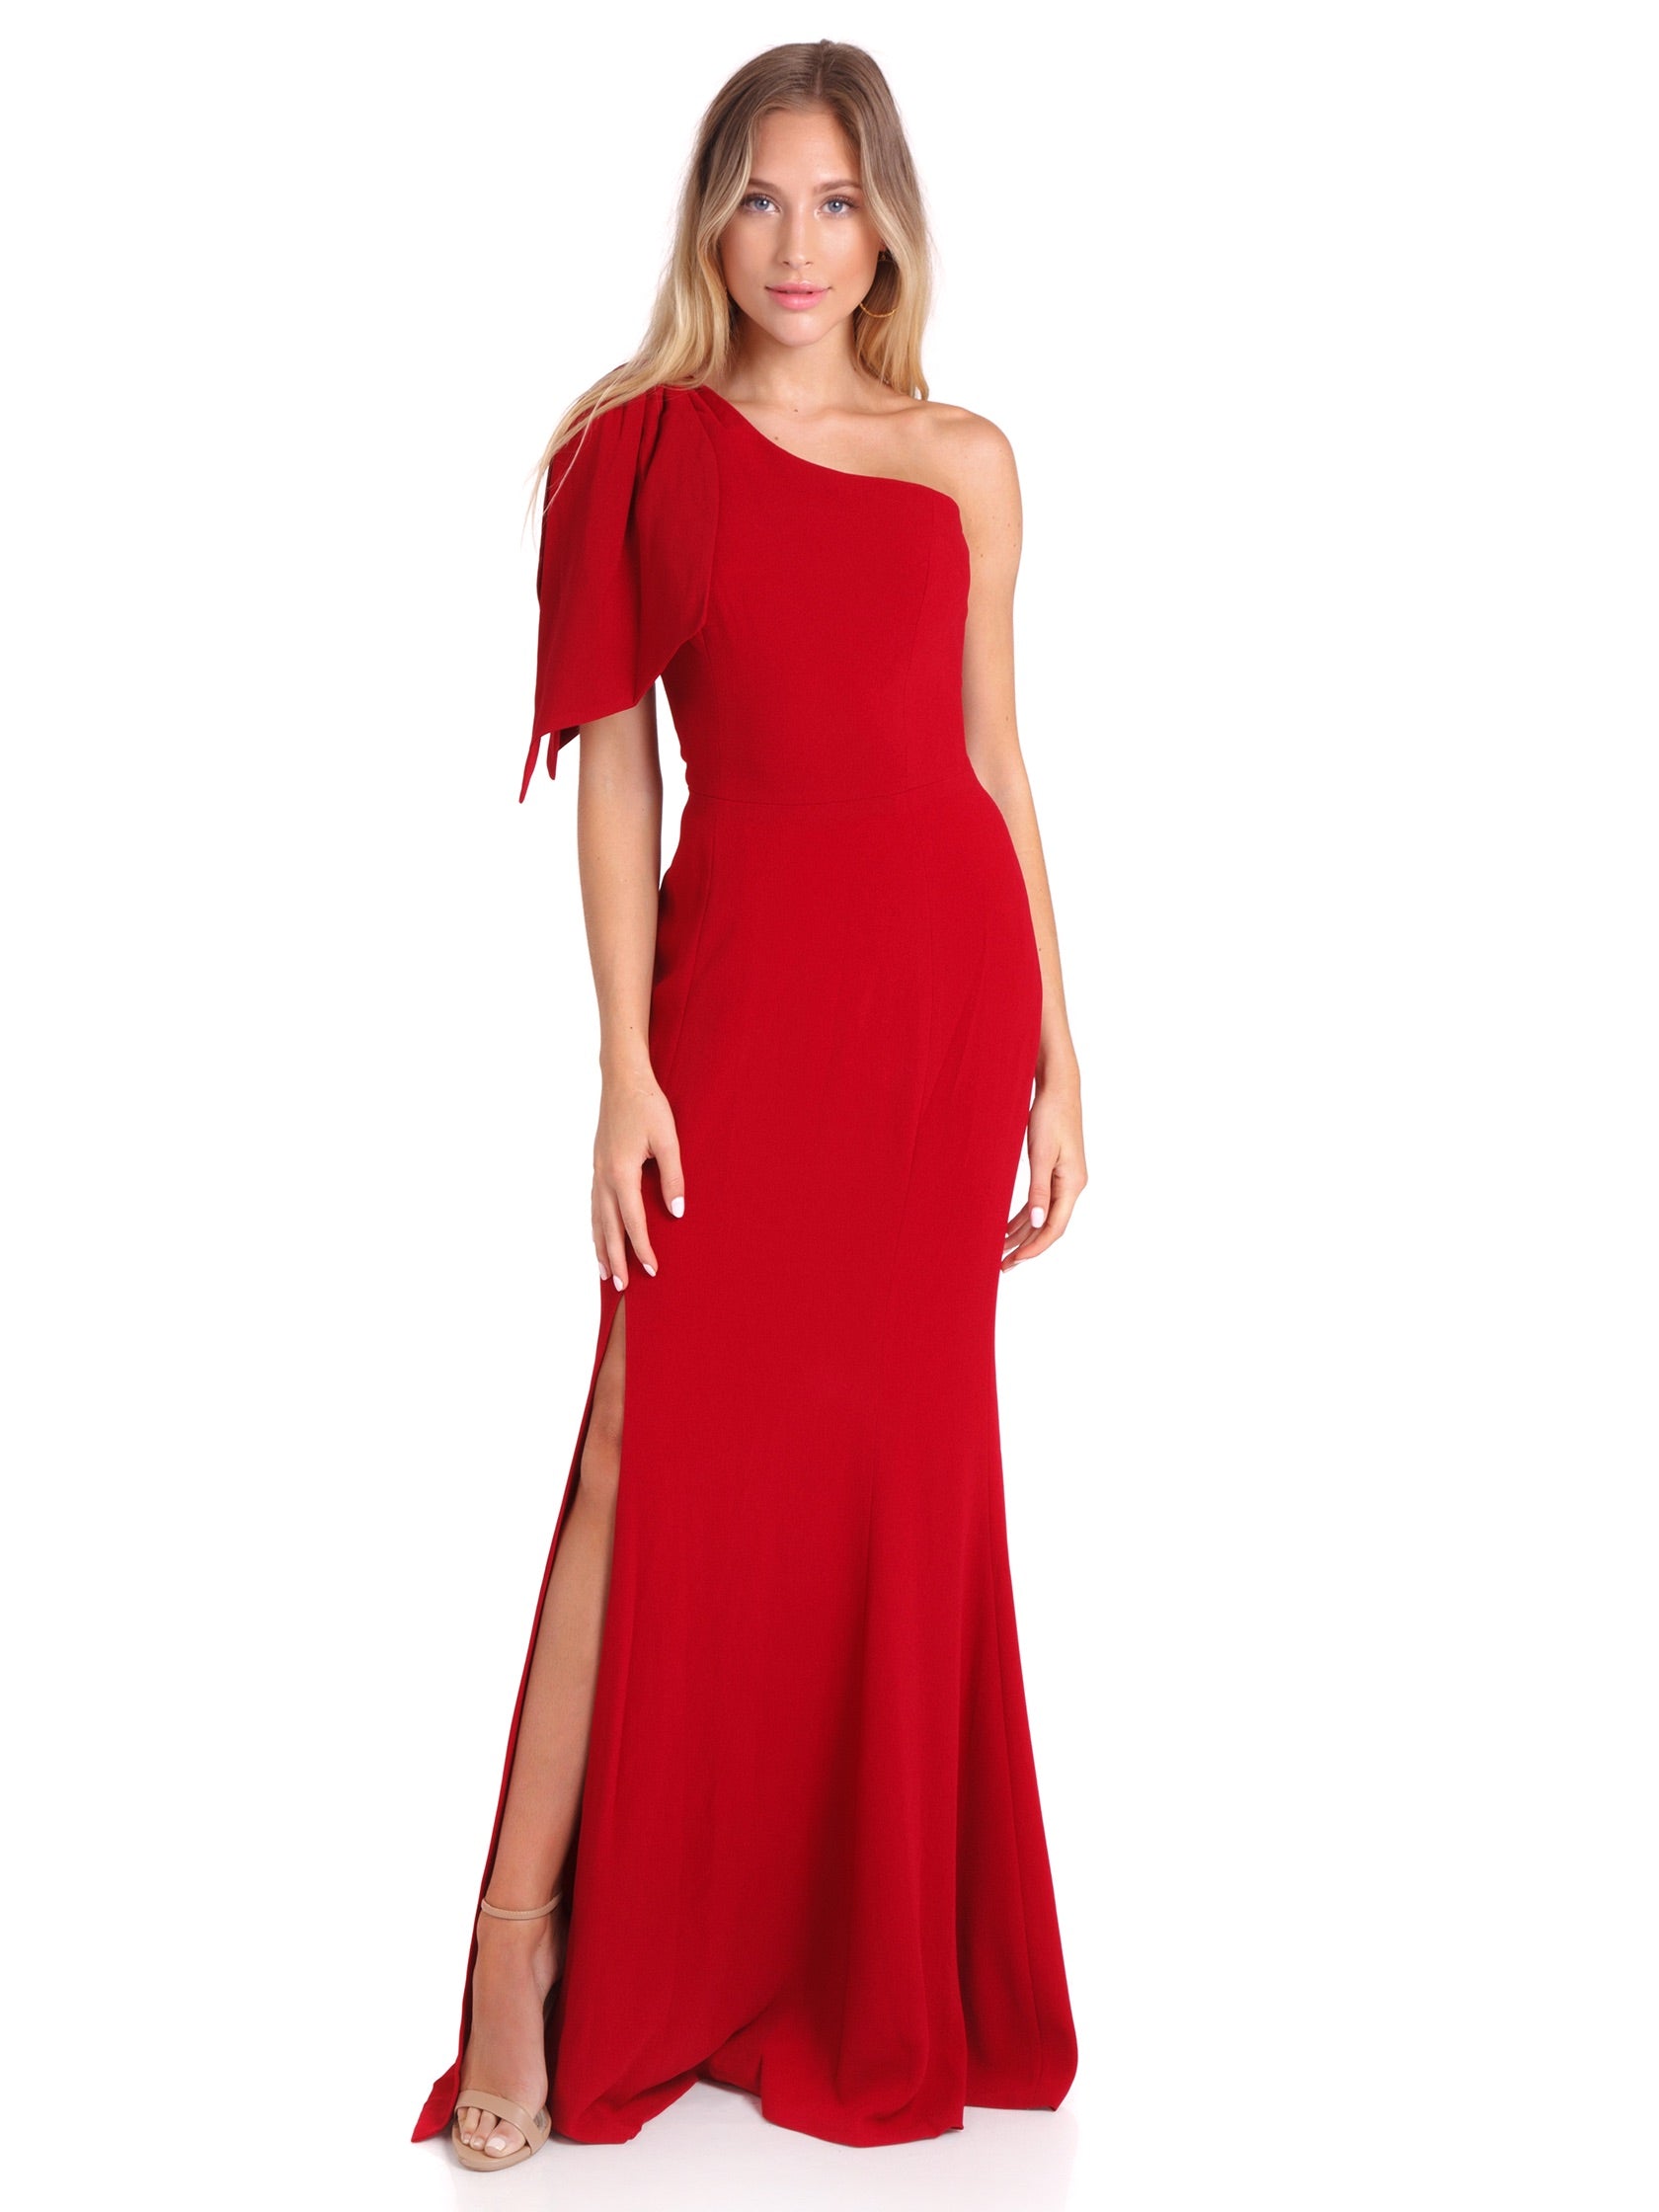 dress the population one shoulder gown